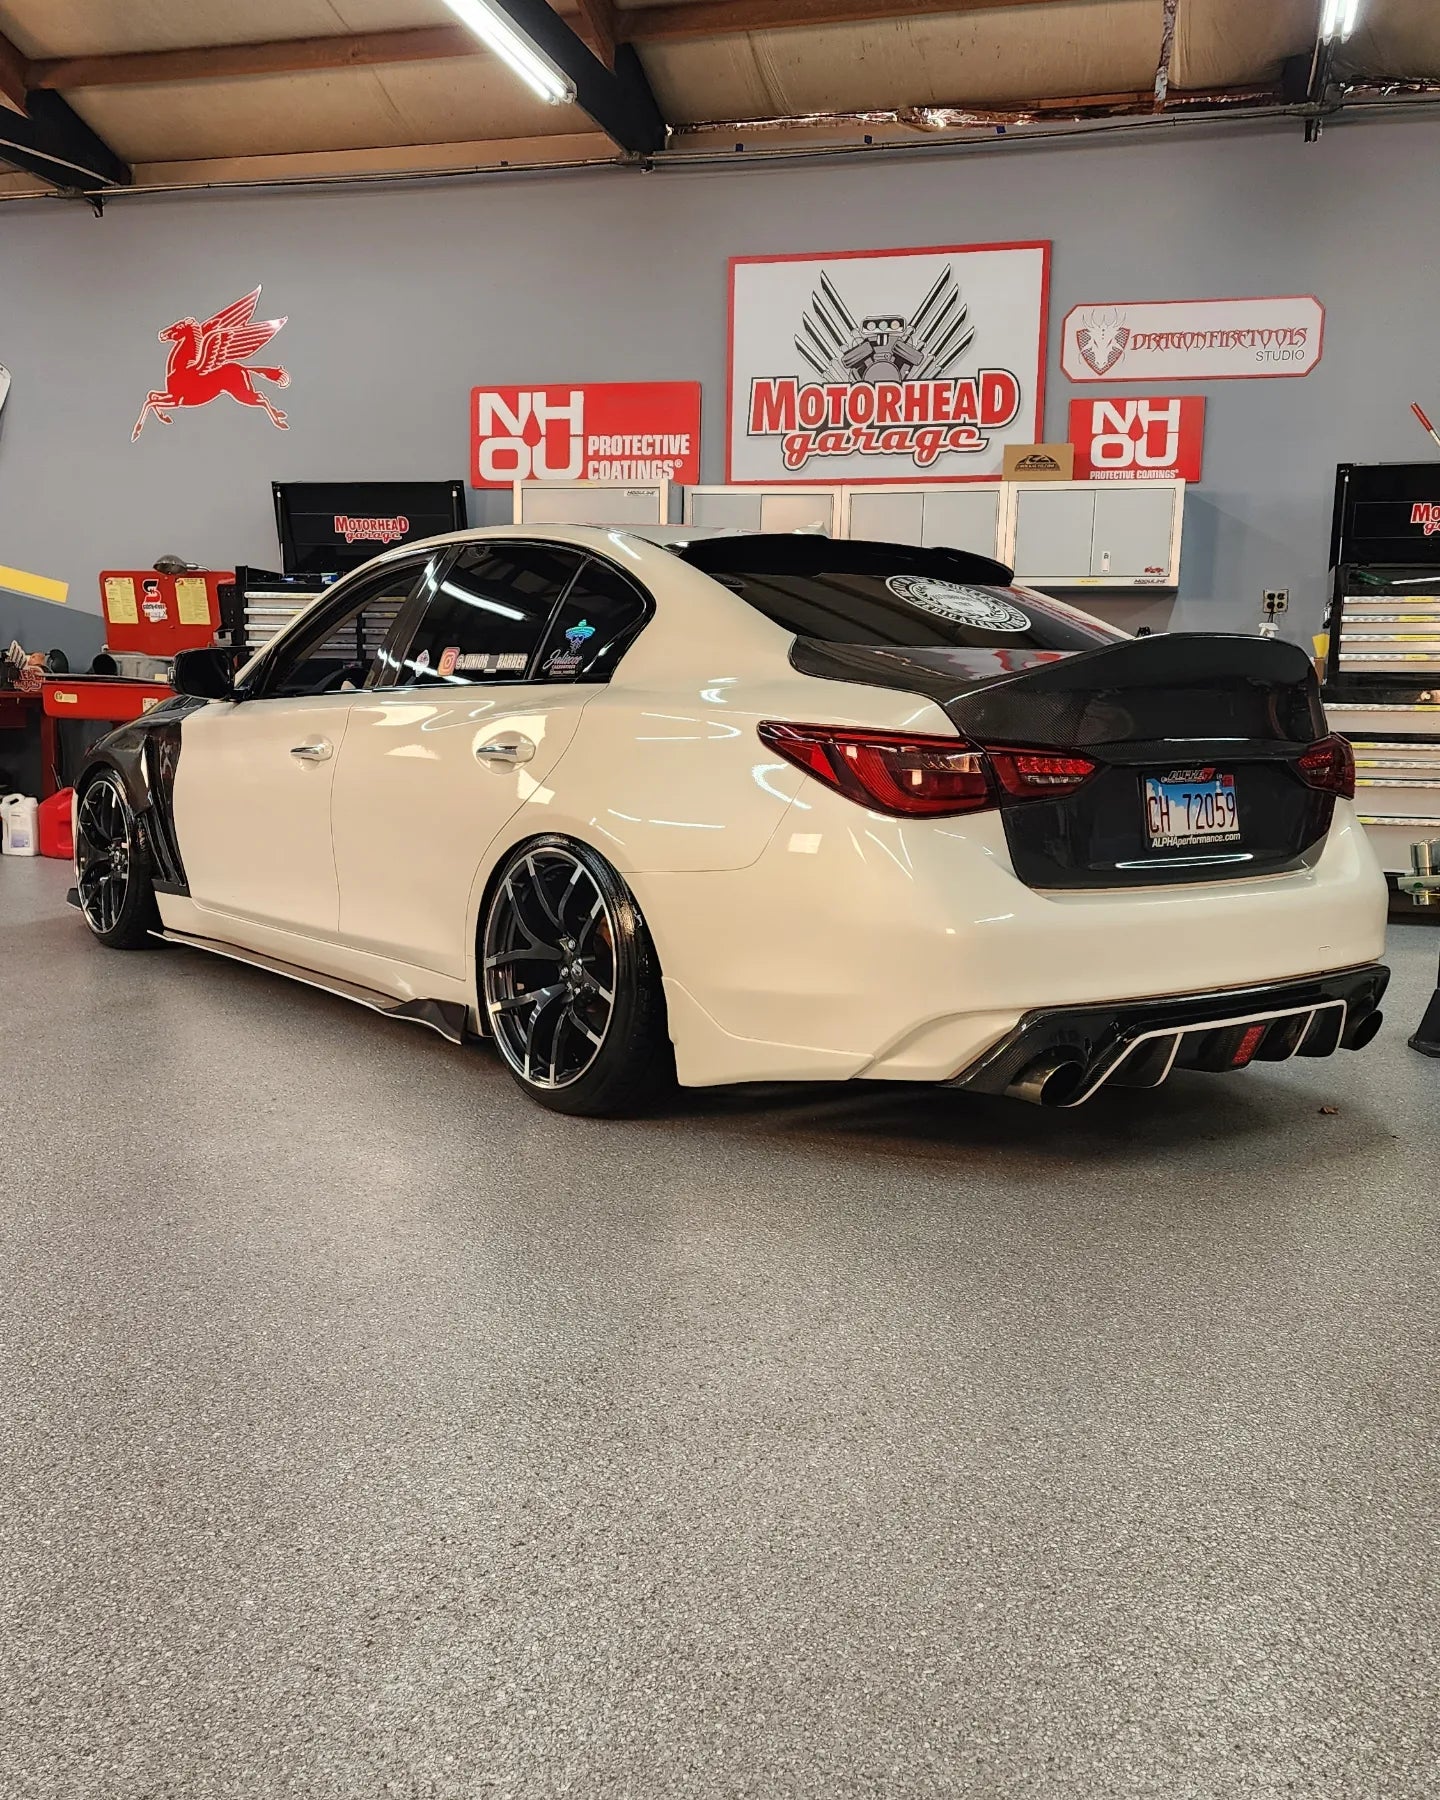 Pair of JCF Carbon Fiber Fenders designed for Q50 14-21+ models, emphasizing the high-quality carbon weave.